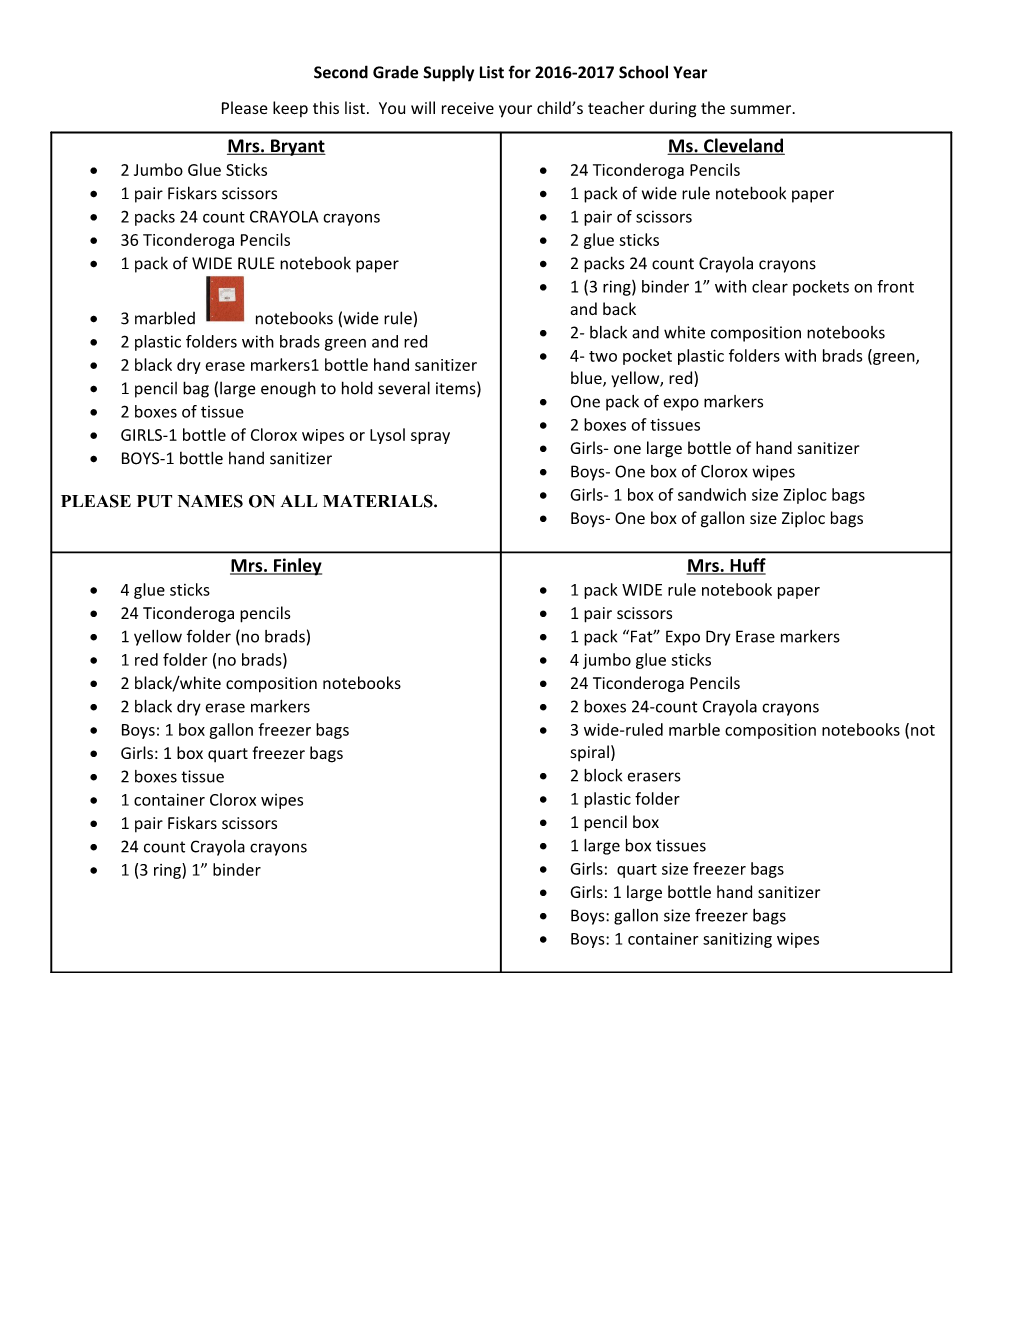 Second Grade Supply List for 2016-2017 School Year